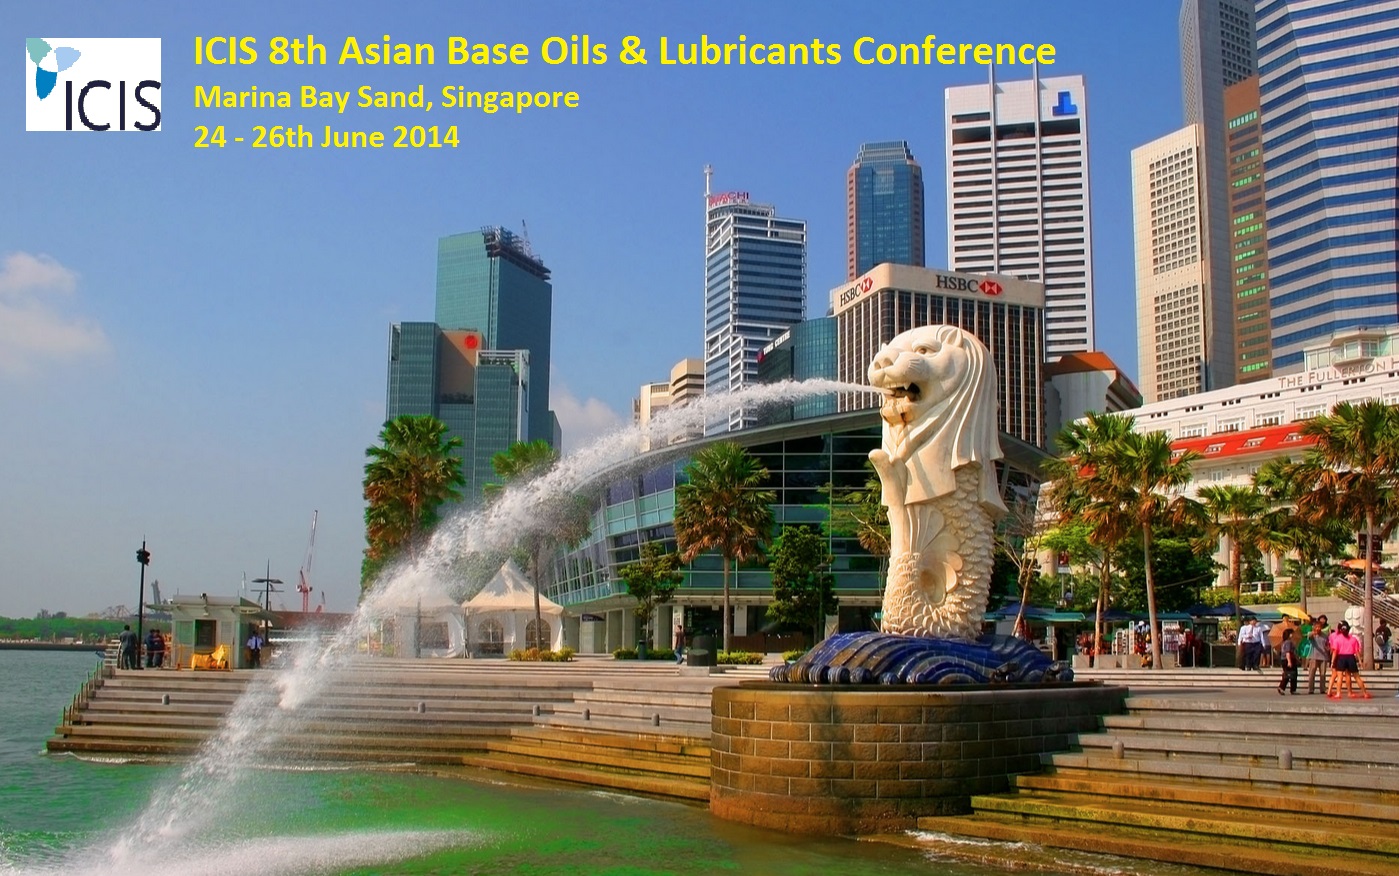 The 8th ICIS Asian Base Oils & Lubricants Conference Held Marina Bay Sands, Singapore On 25 – 26th June 2014